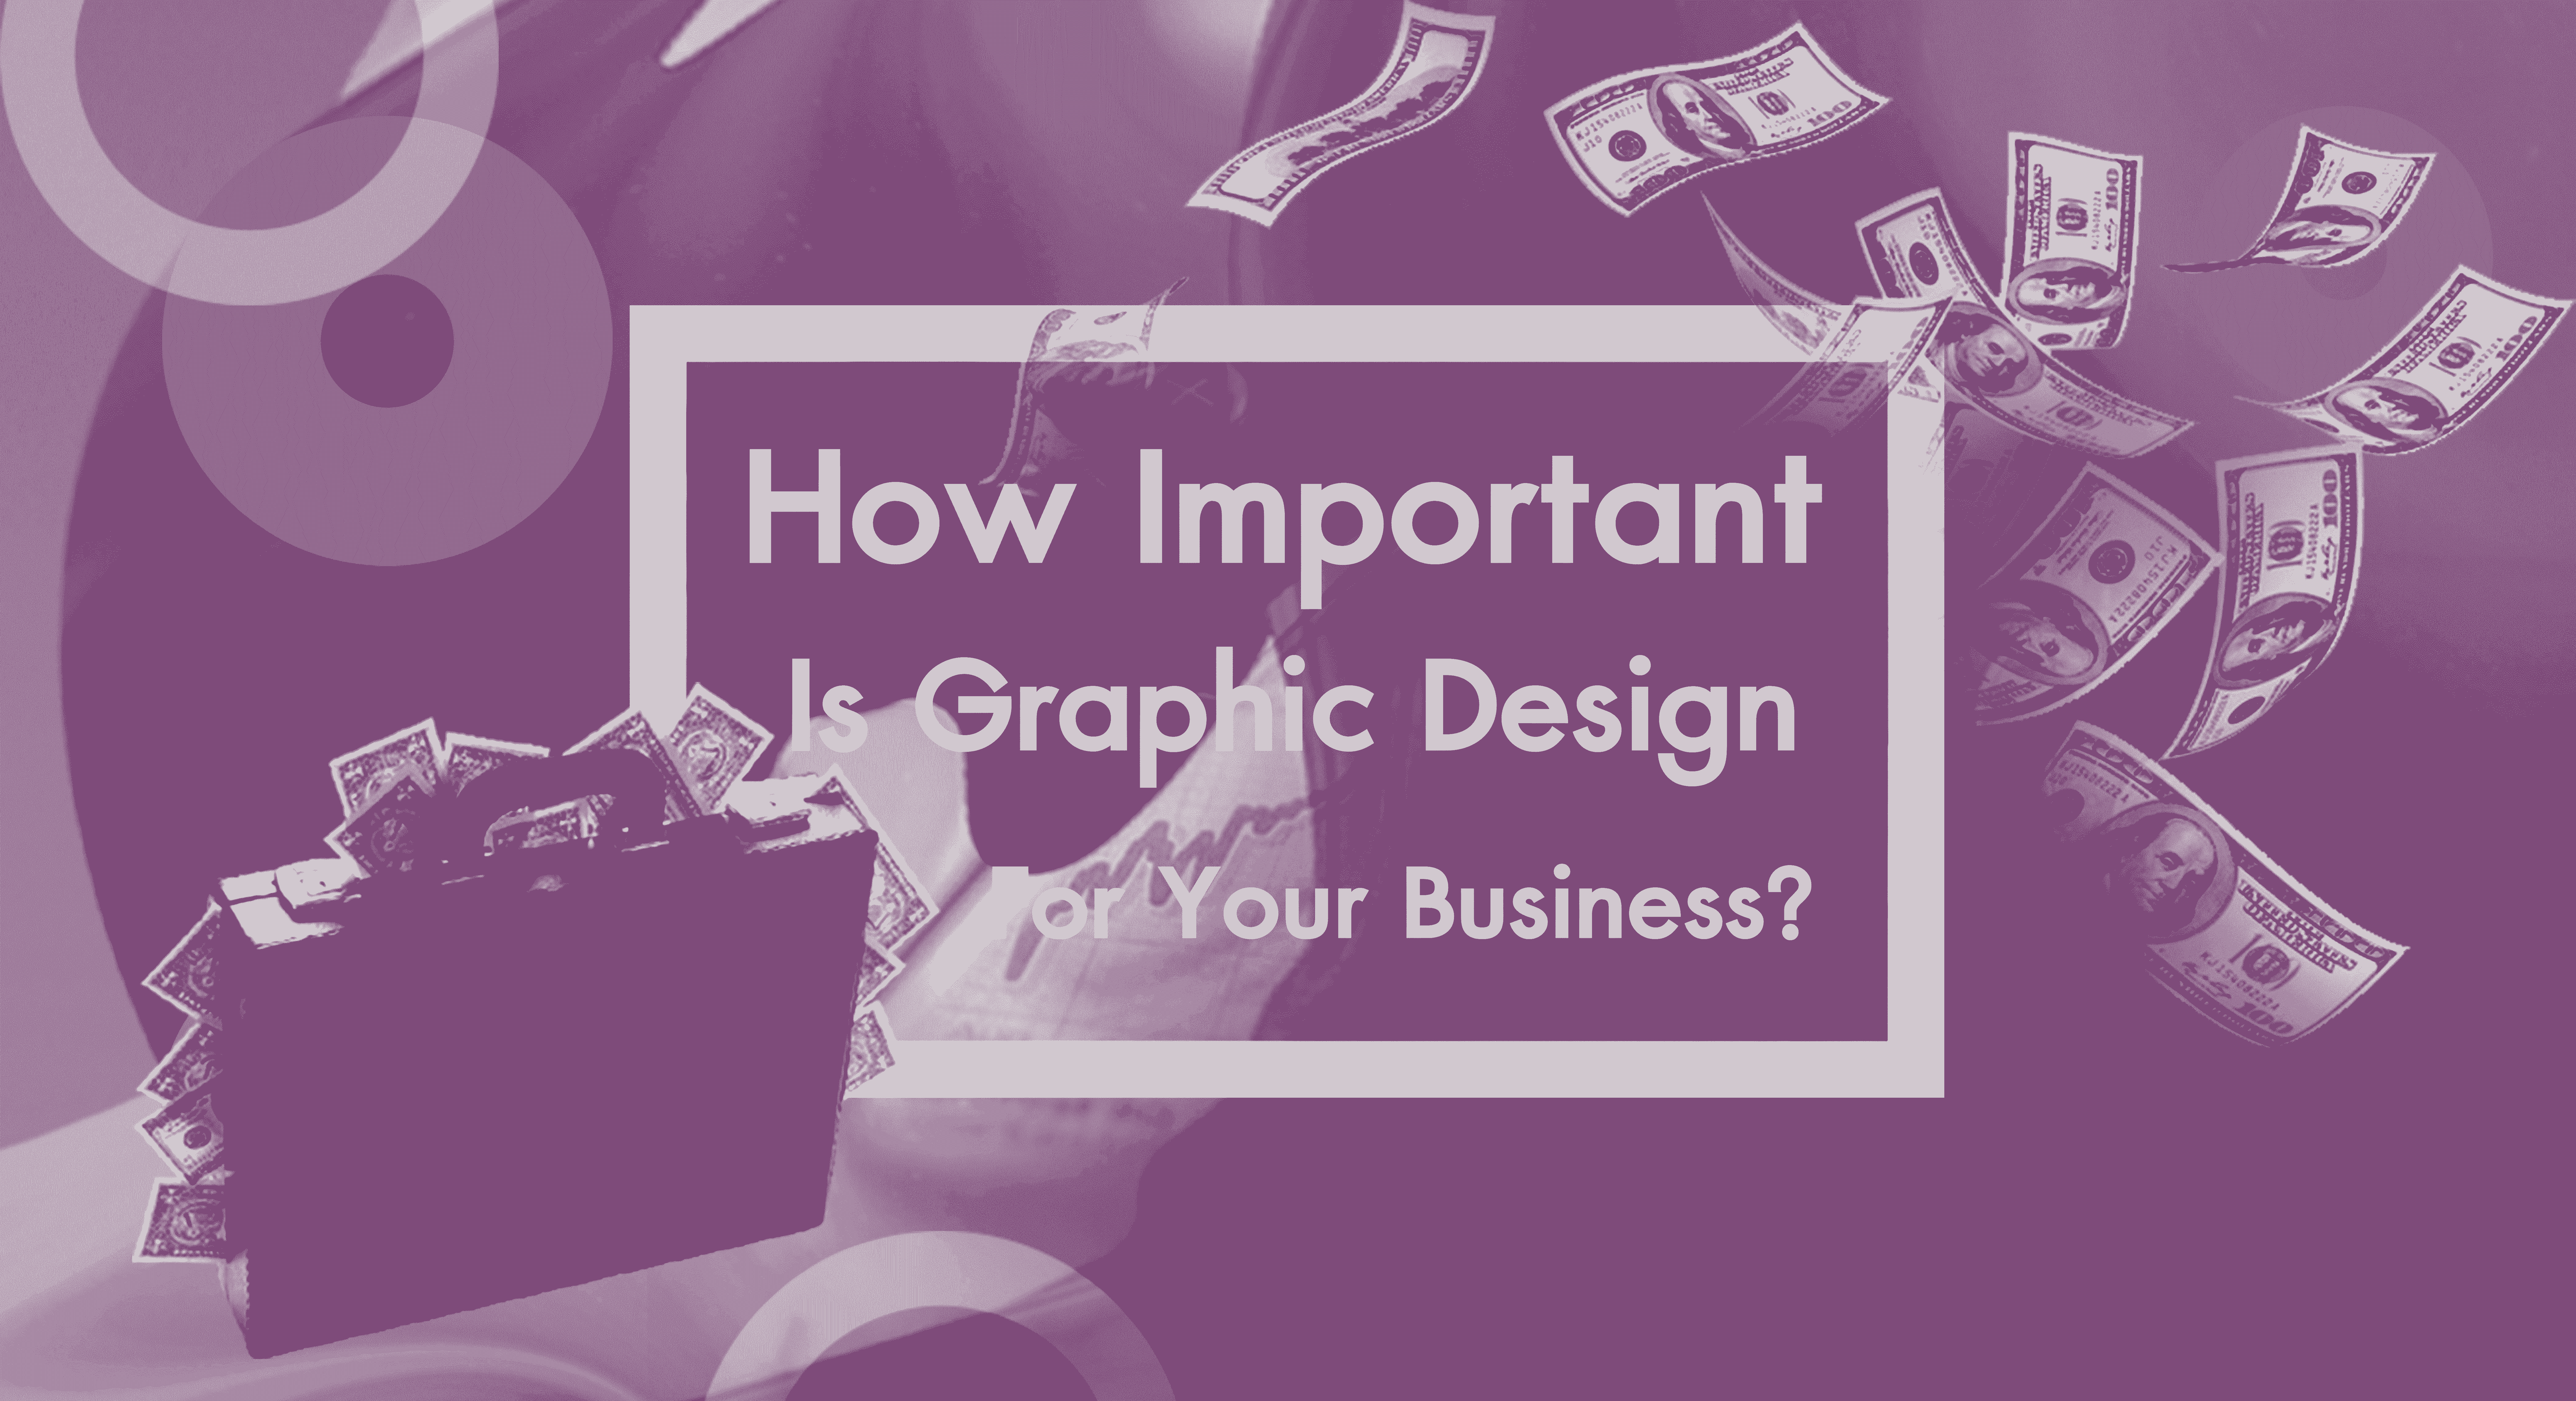 How Important Is Graphic Design For Your Business?